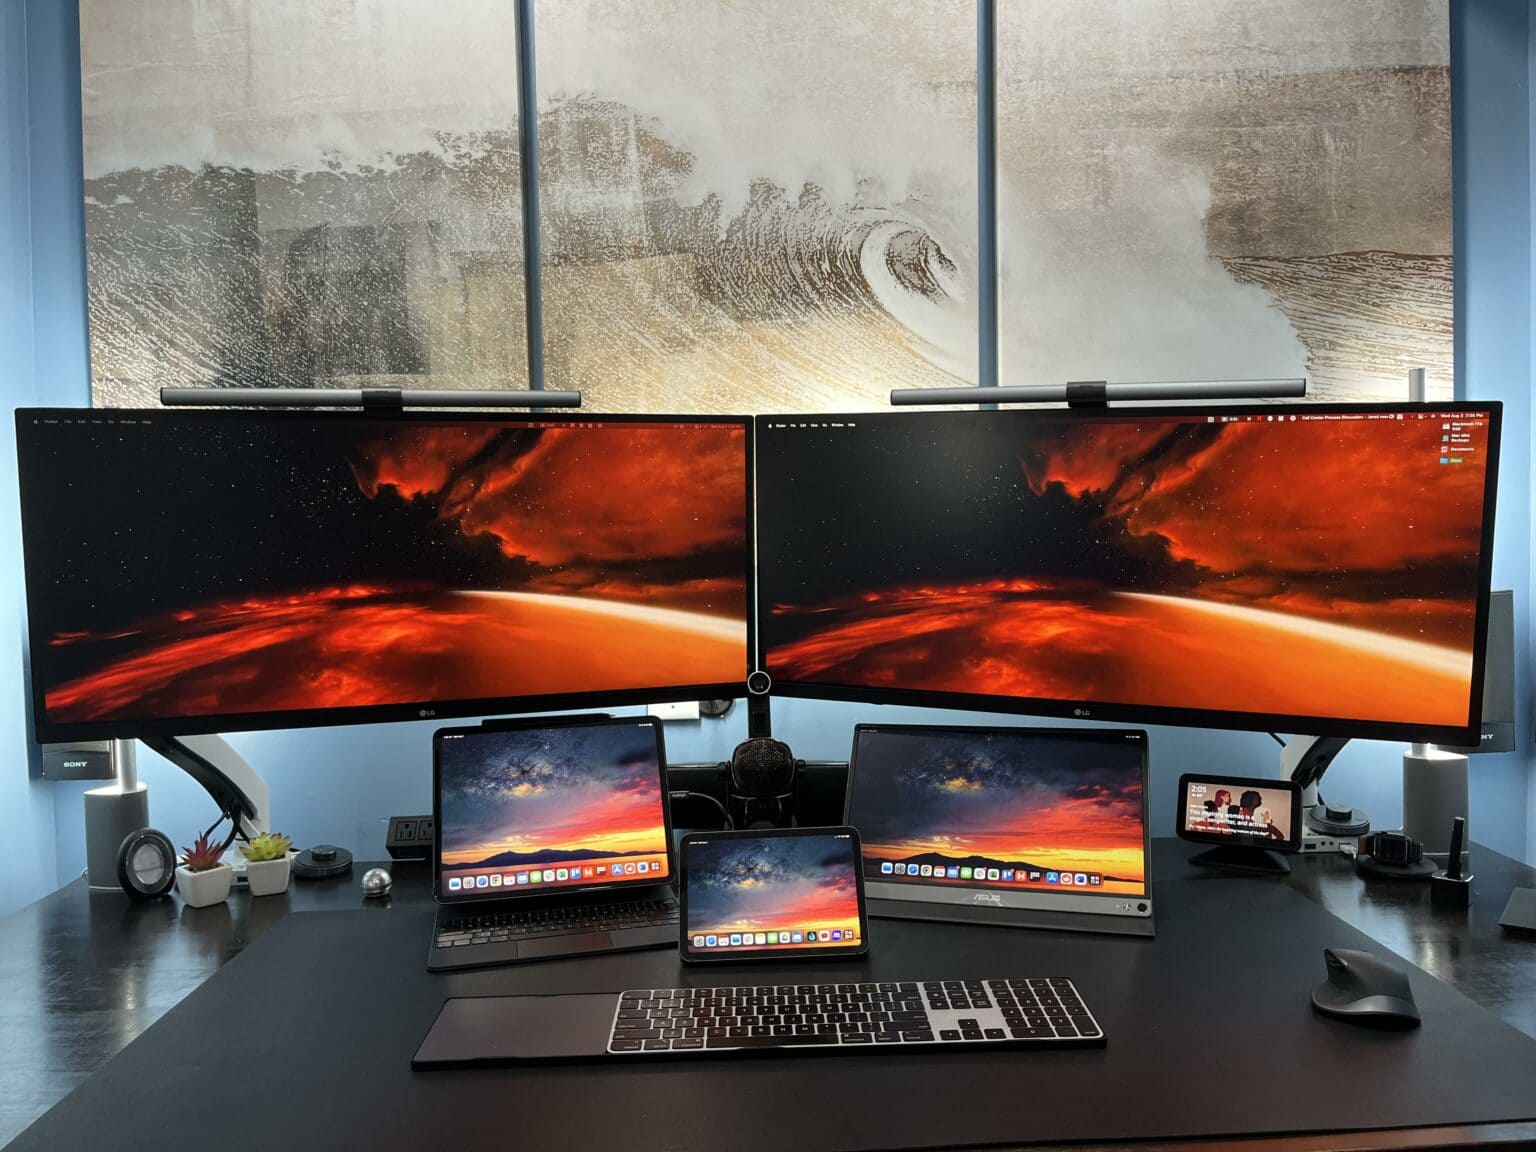 The M1 Mac mini isn't pictured, but you can't miss the dual 34-inch displays, two iPads and an Echo Show 5.